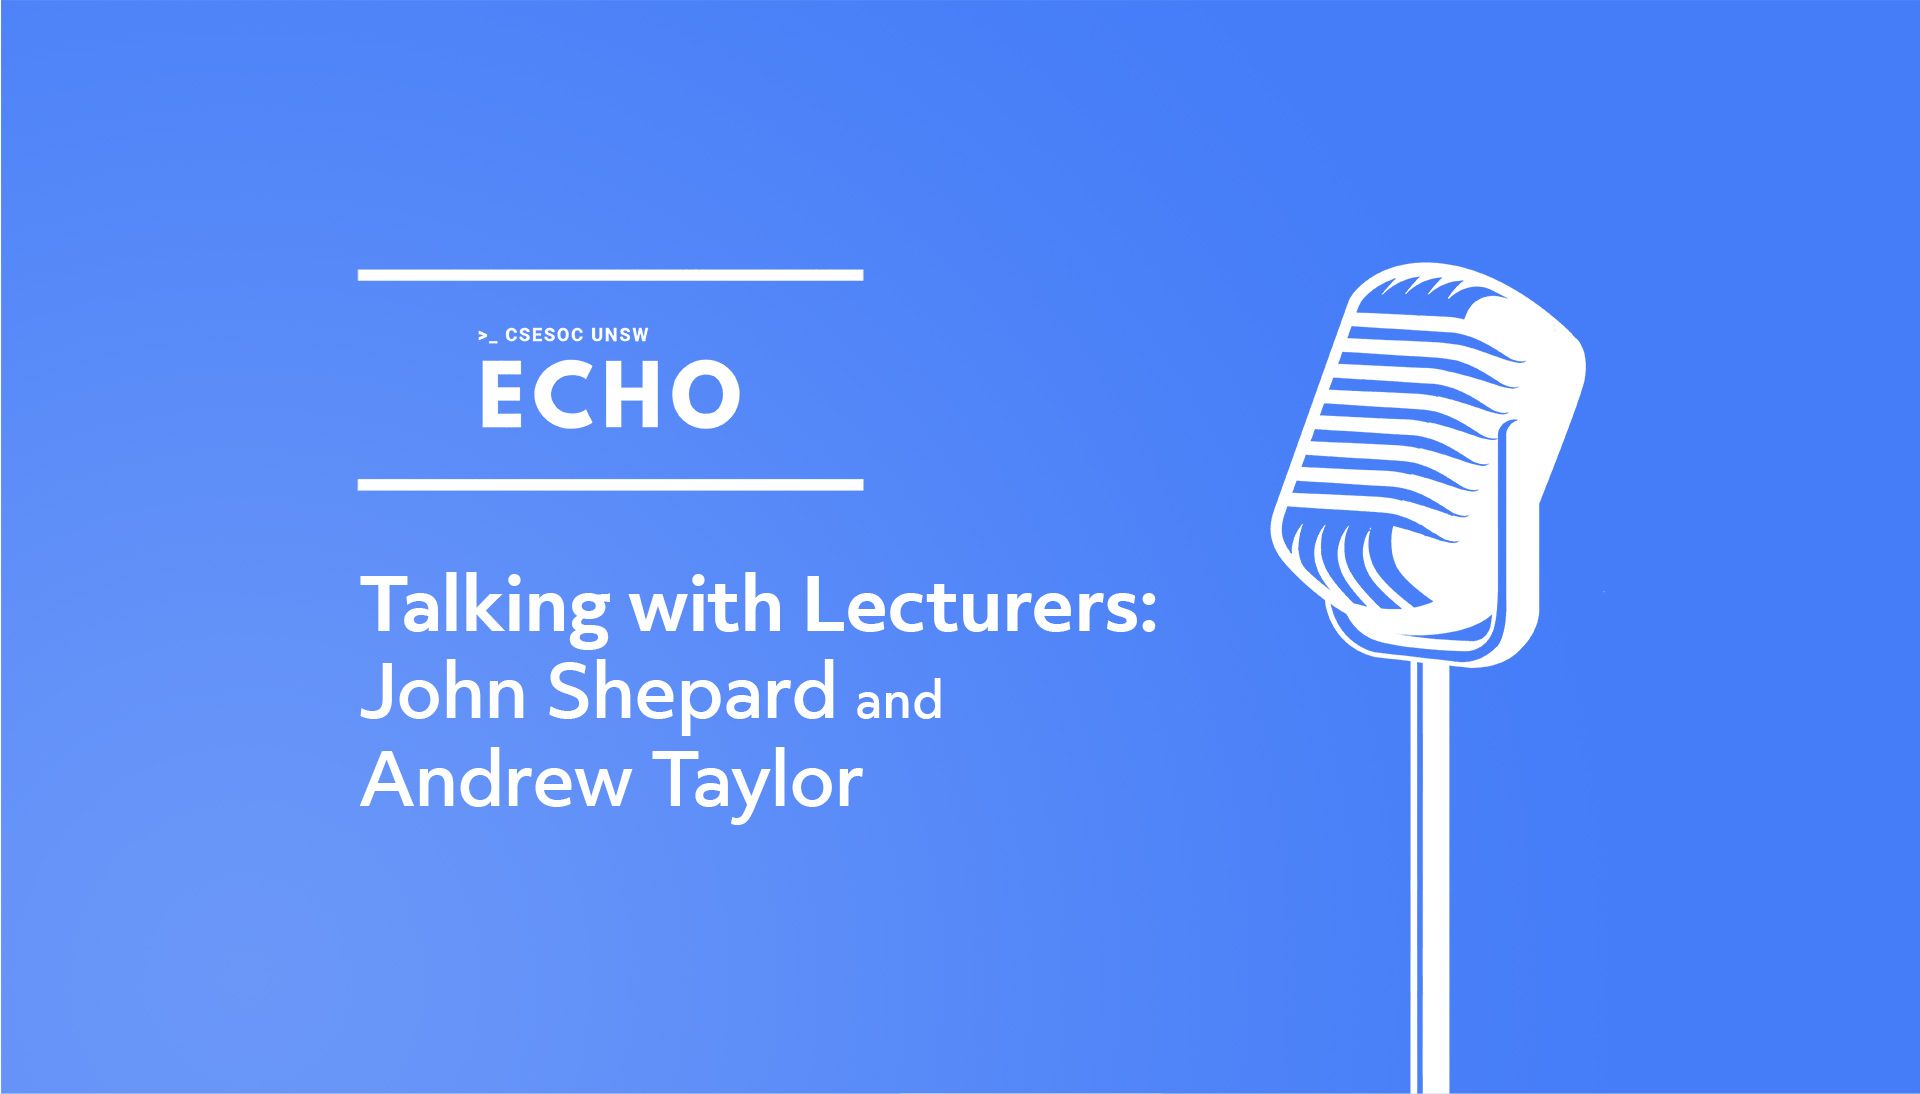 Talking with Lecturers: John Shepherd and Andrew Taylor